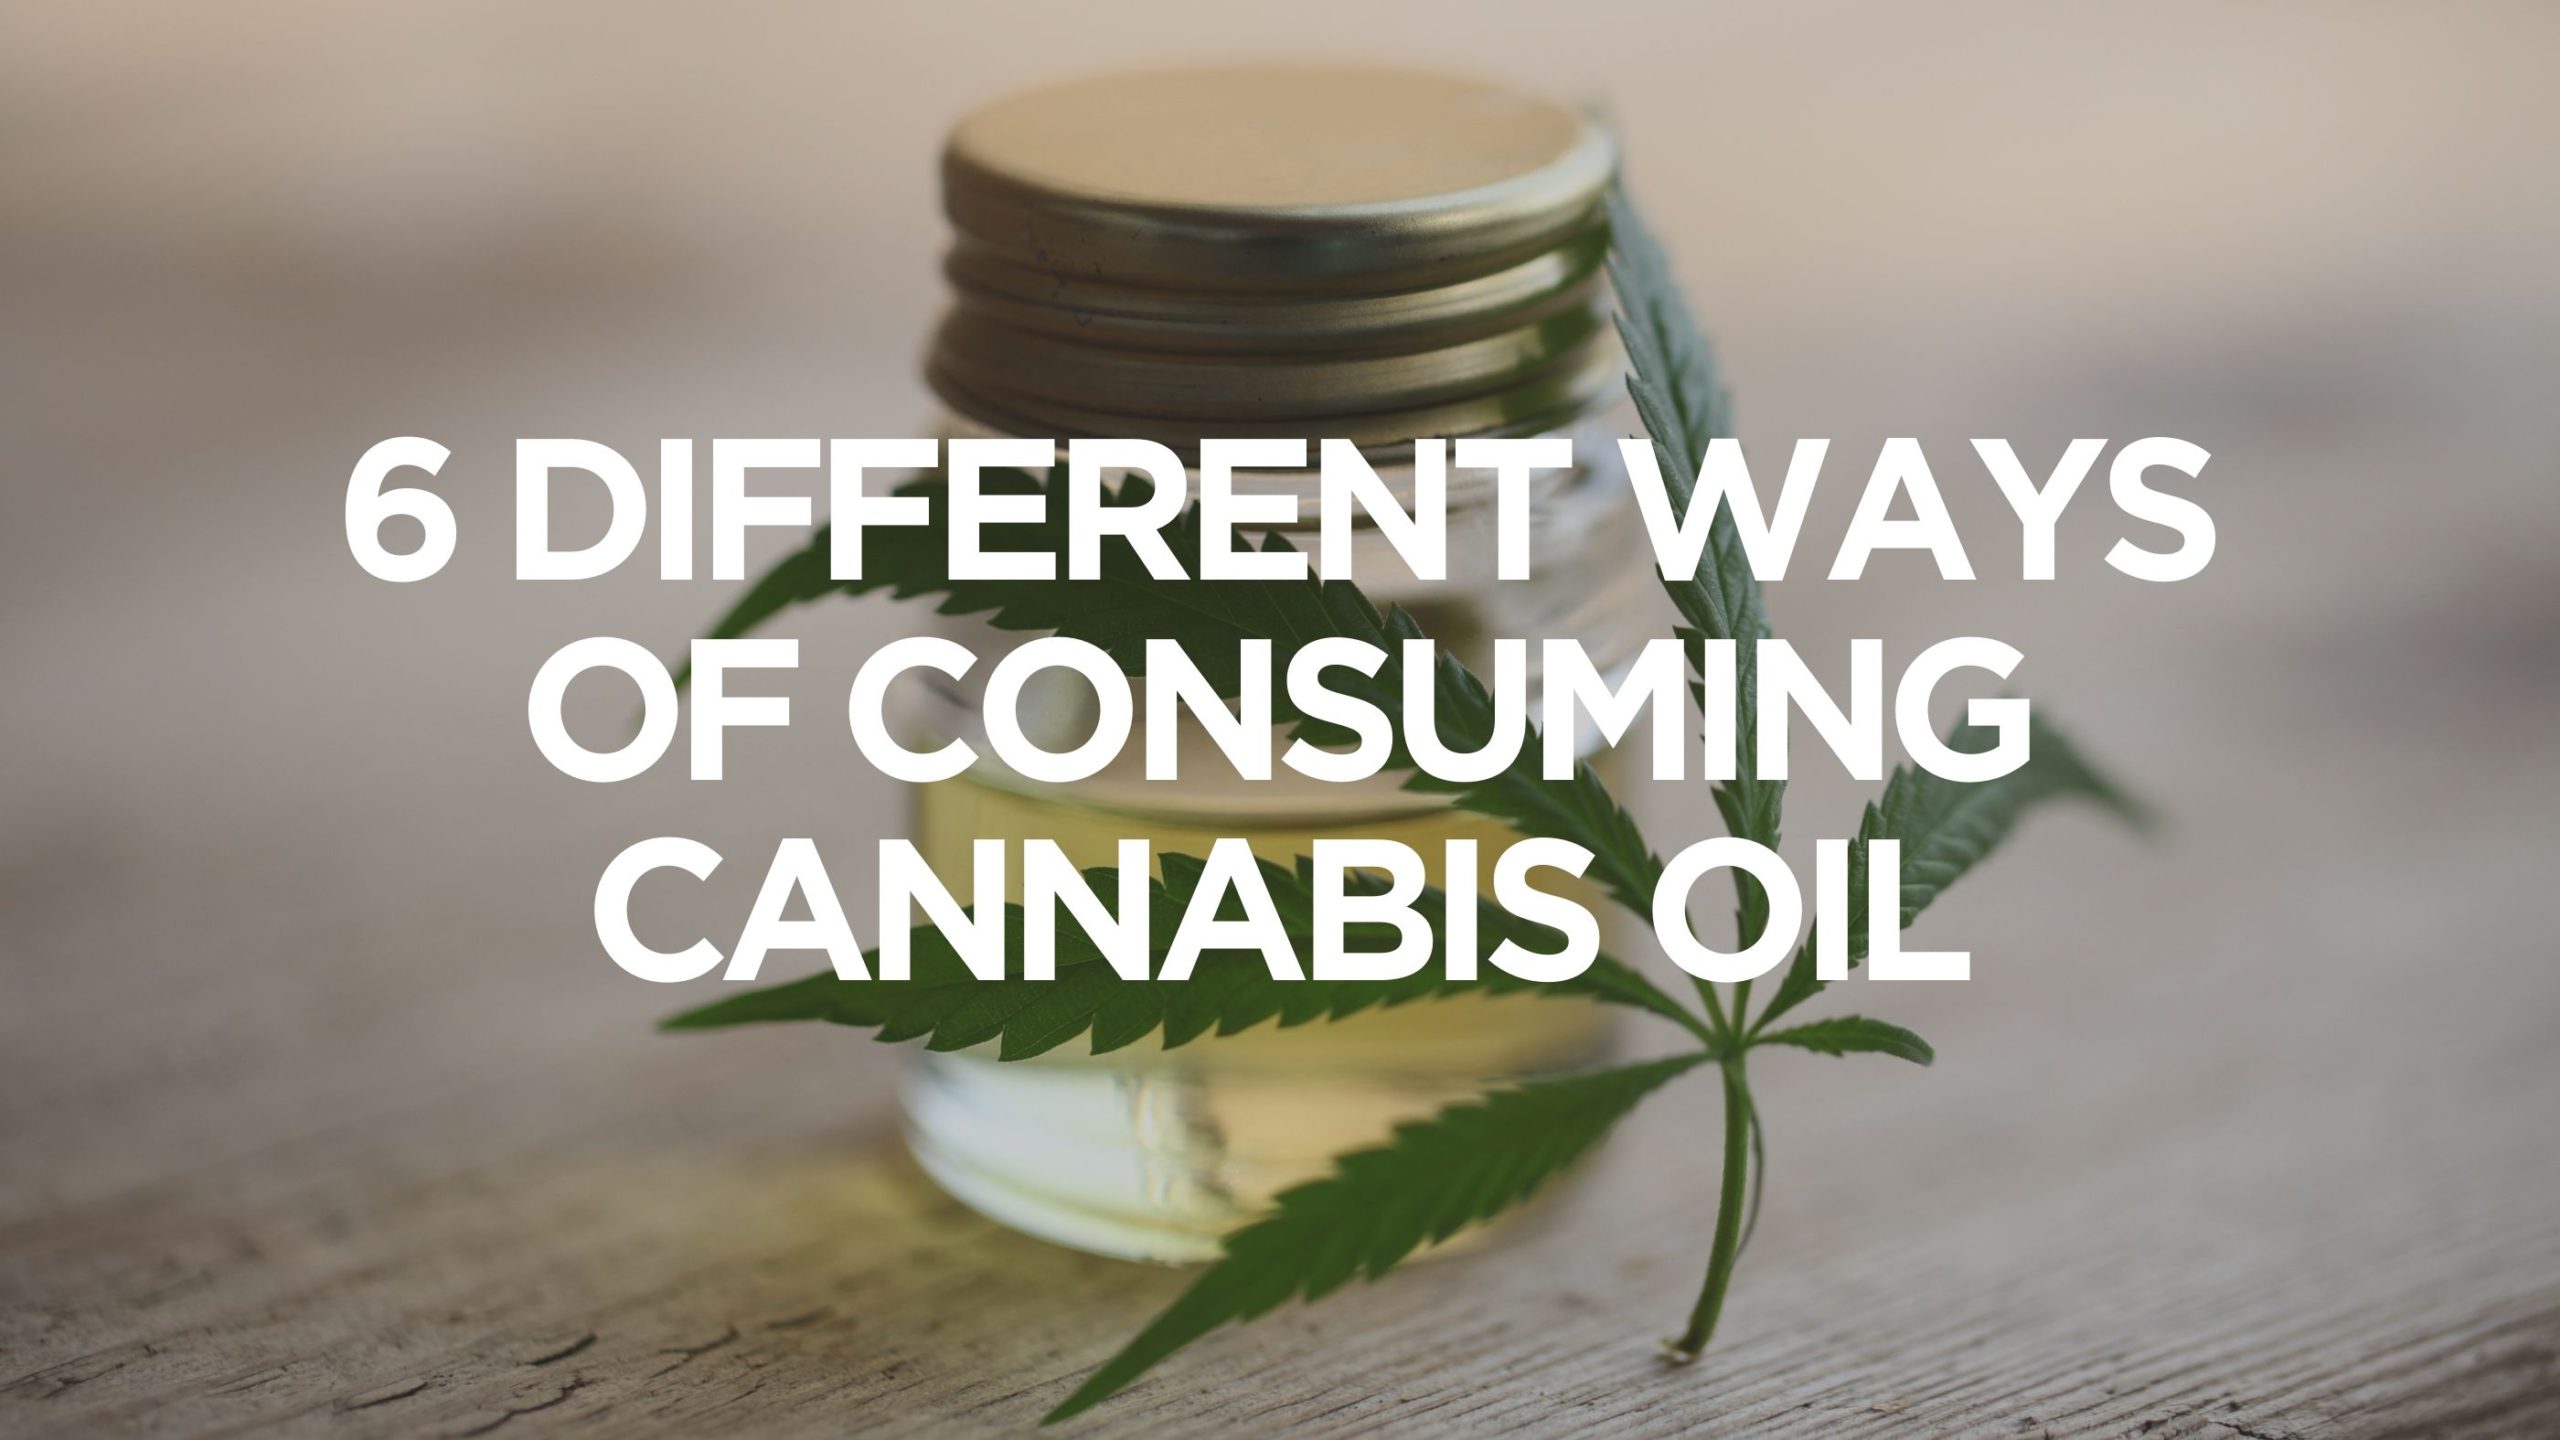 6 Different Ways of Consuming Cannabis Oil - Creator's Choice